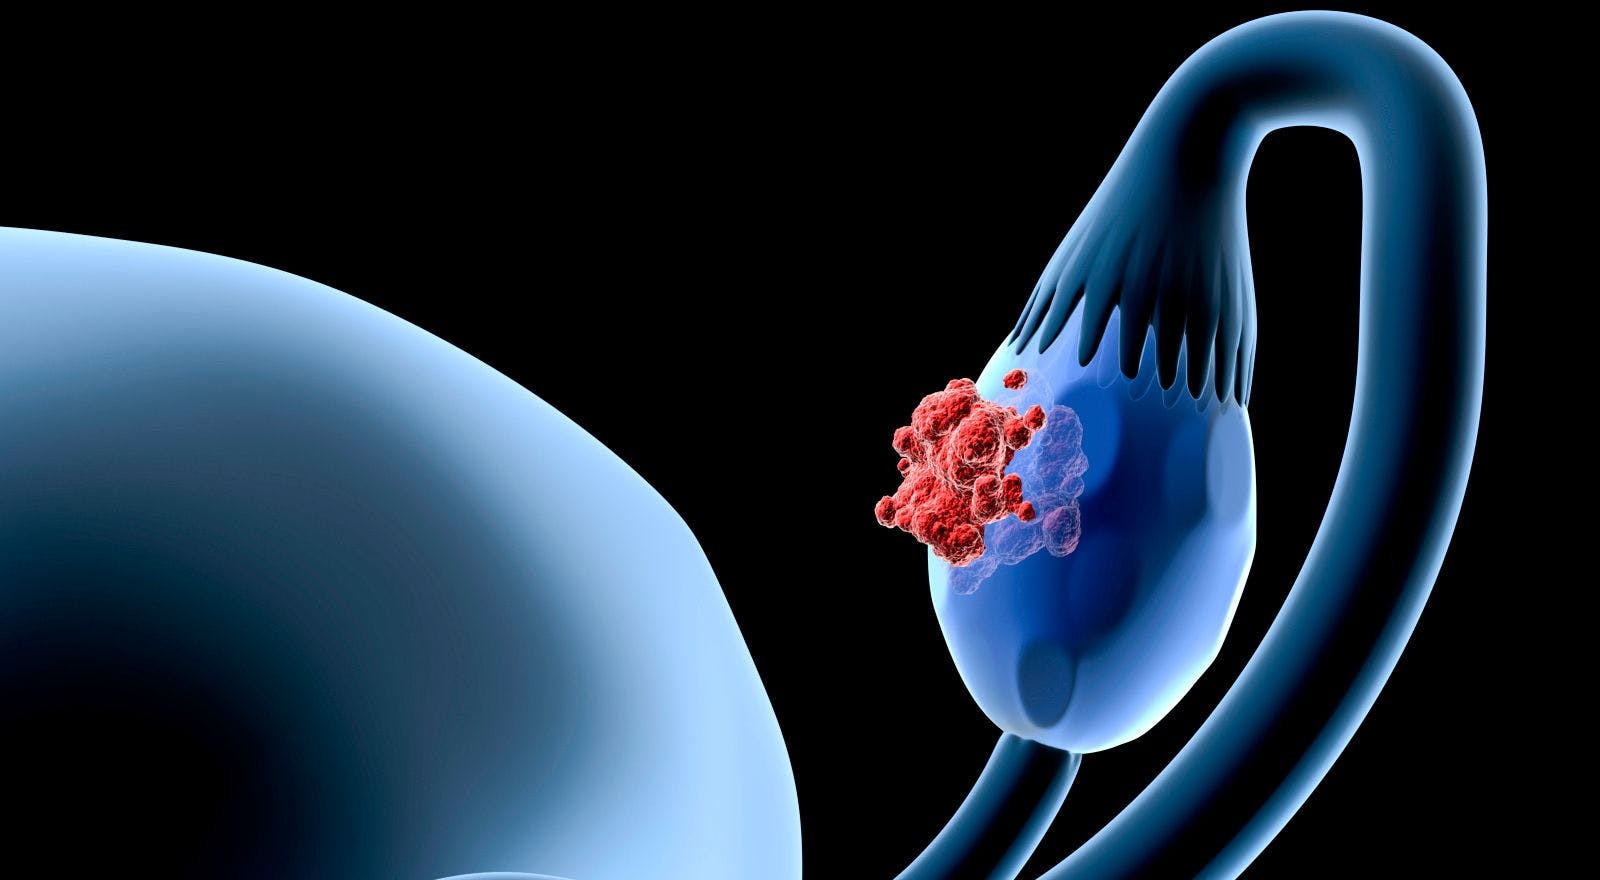 Chemotherapy "Bath" Warms Up Chances of Ovarian Cancer Survival 